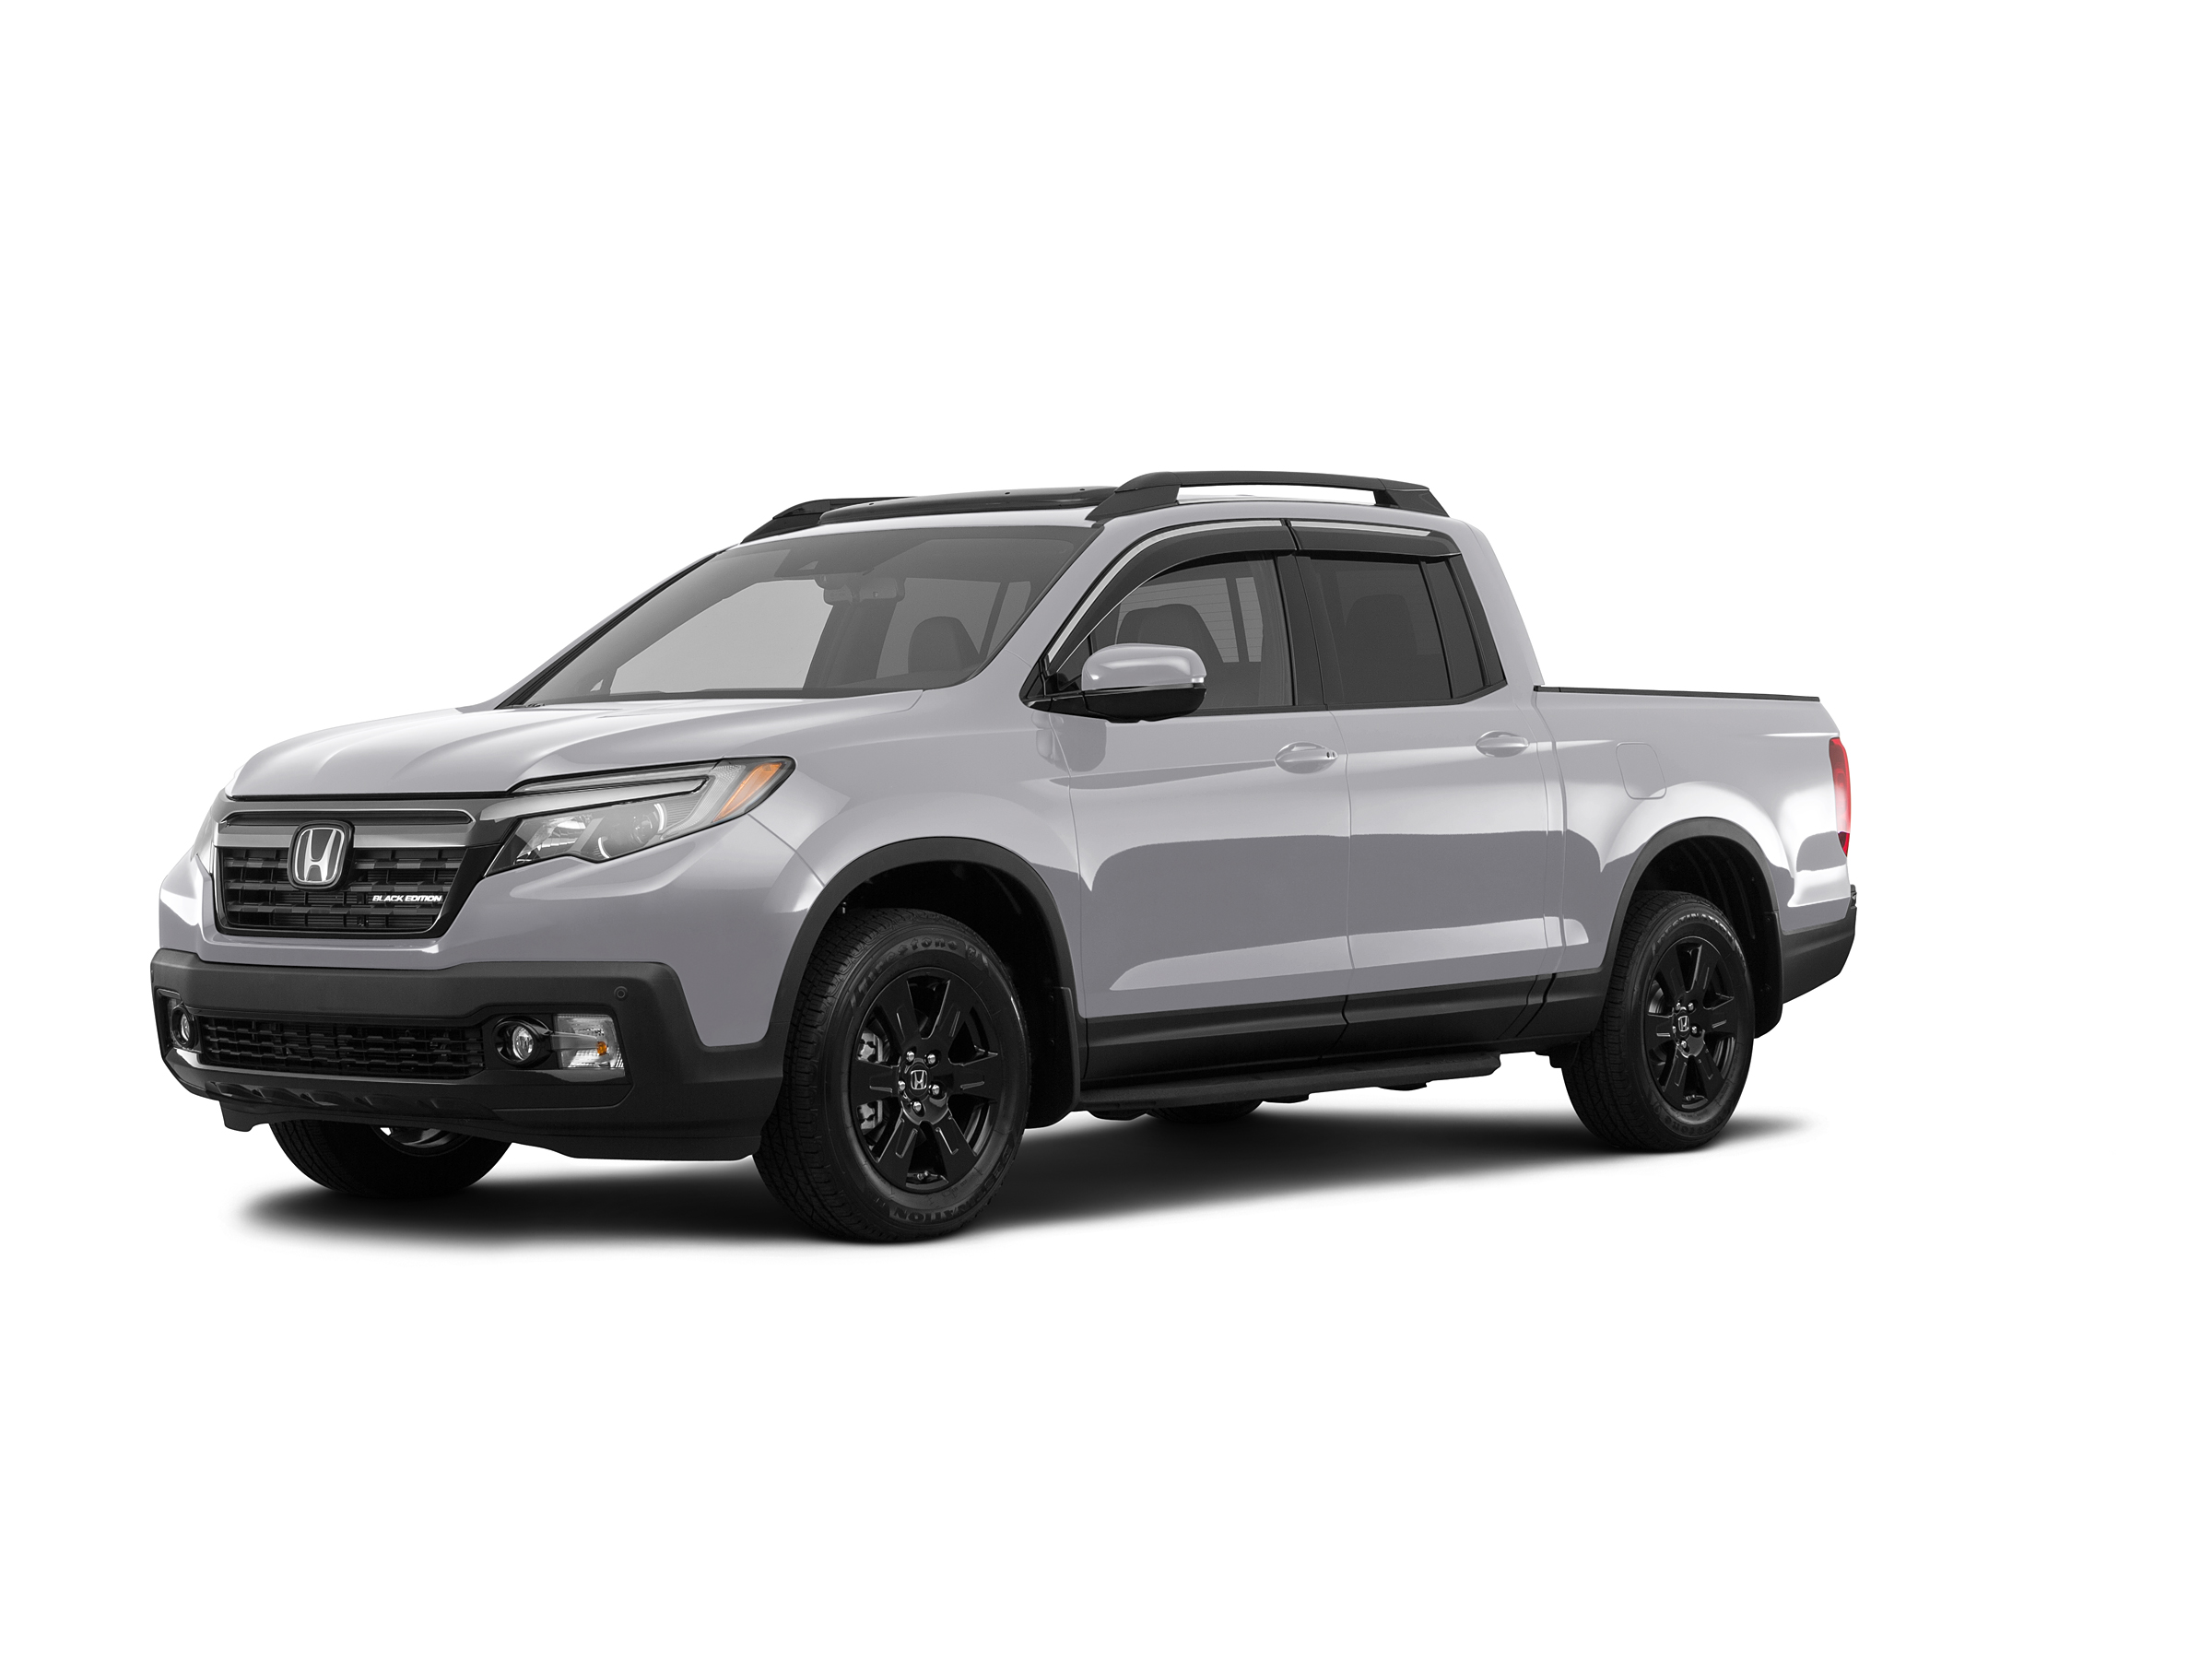 Looking for a used Honda Ridgeline? Look no further than Gary Yeomans Honda, and rest assured that you'll find exactly what you are searching for.